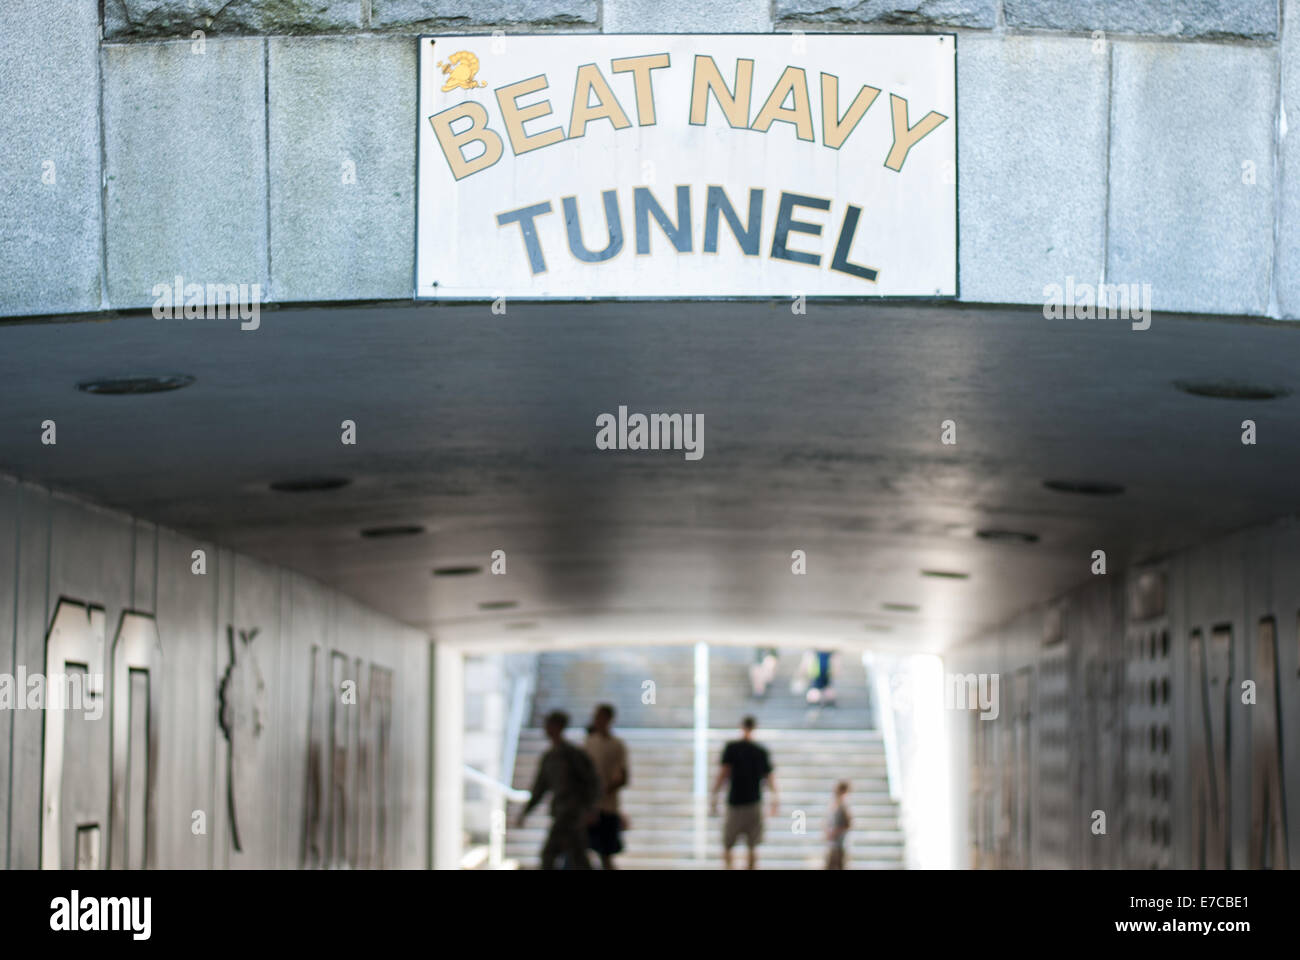 The United States Military Academy Beat Navy Tunnel at West Point, NY Stock Photo